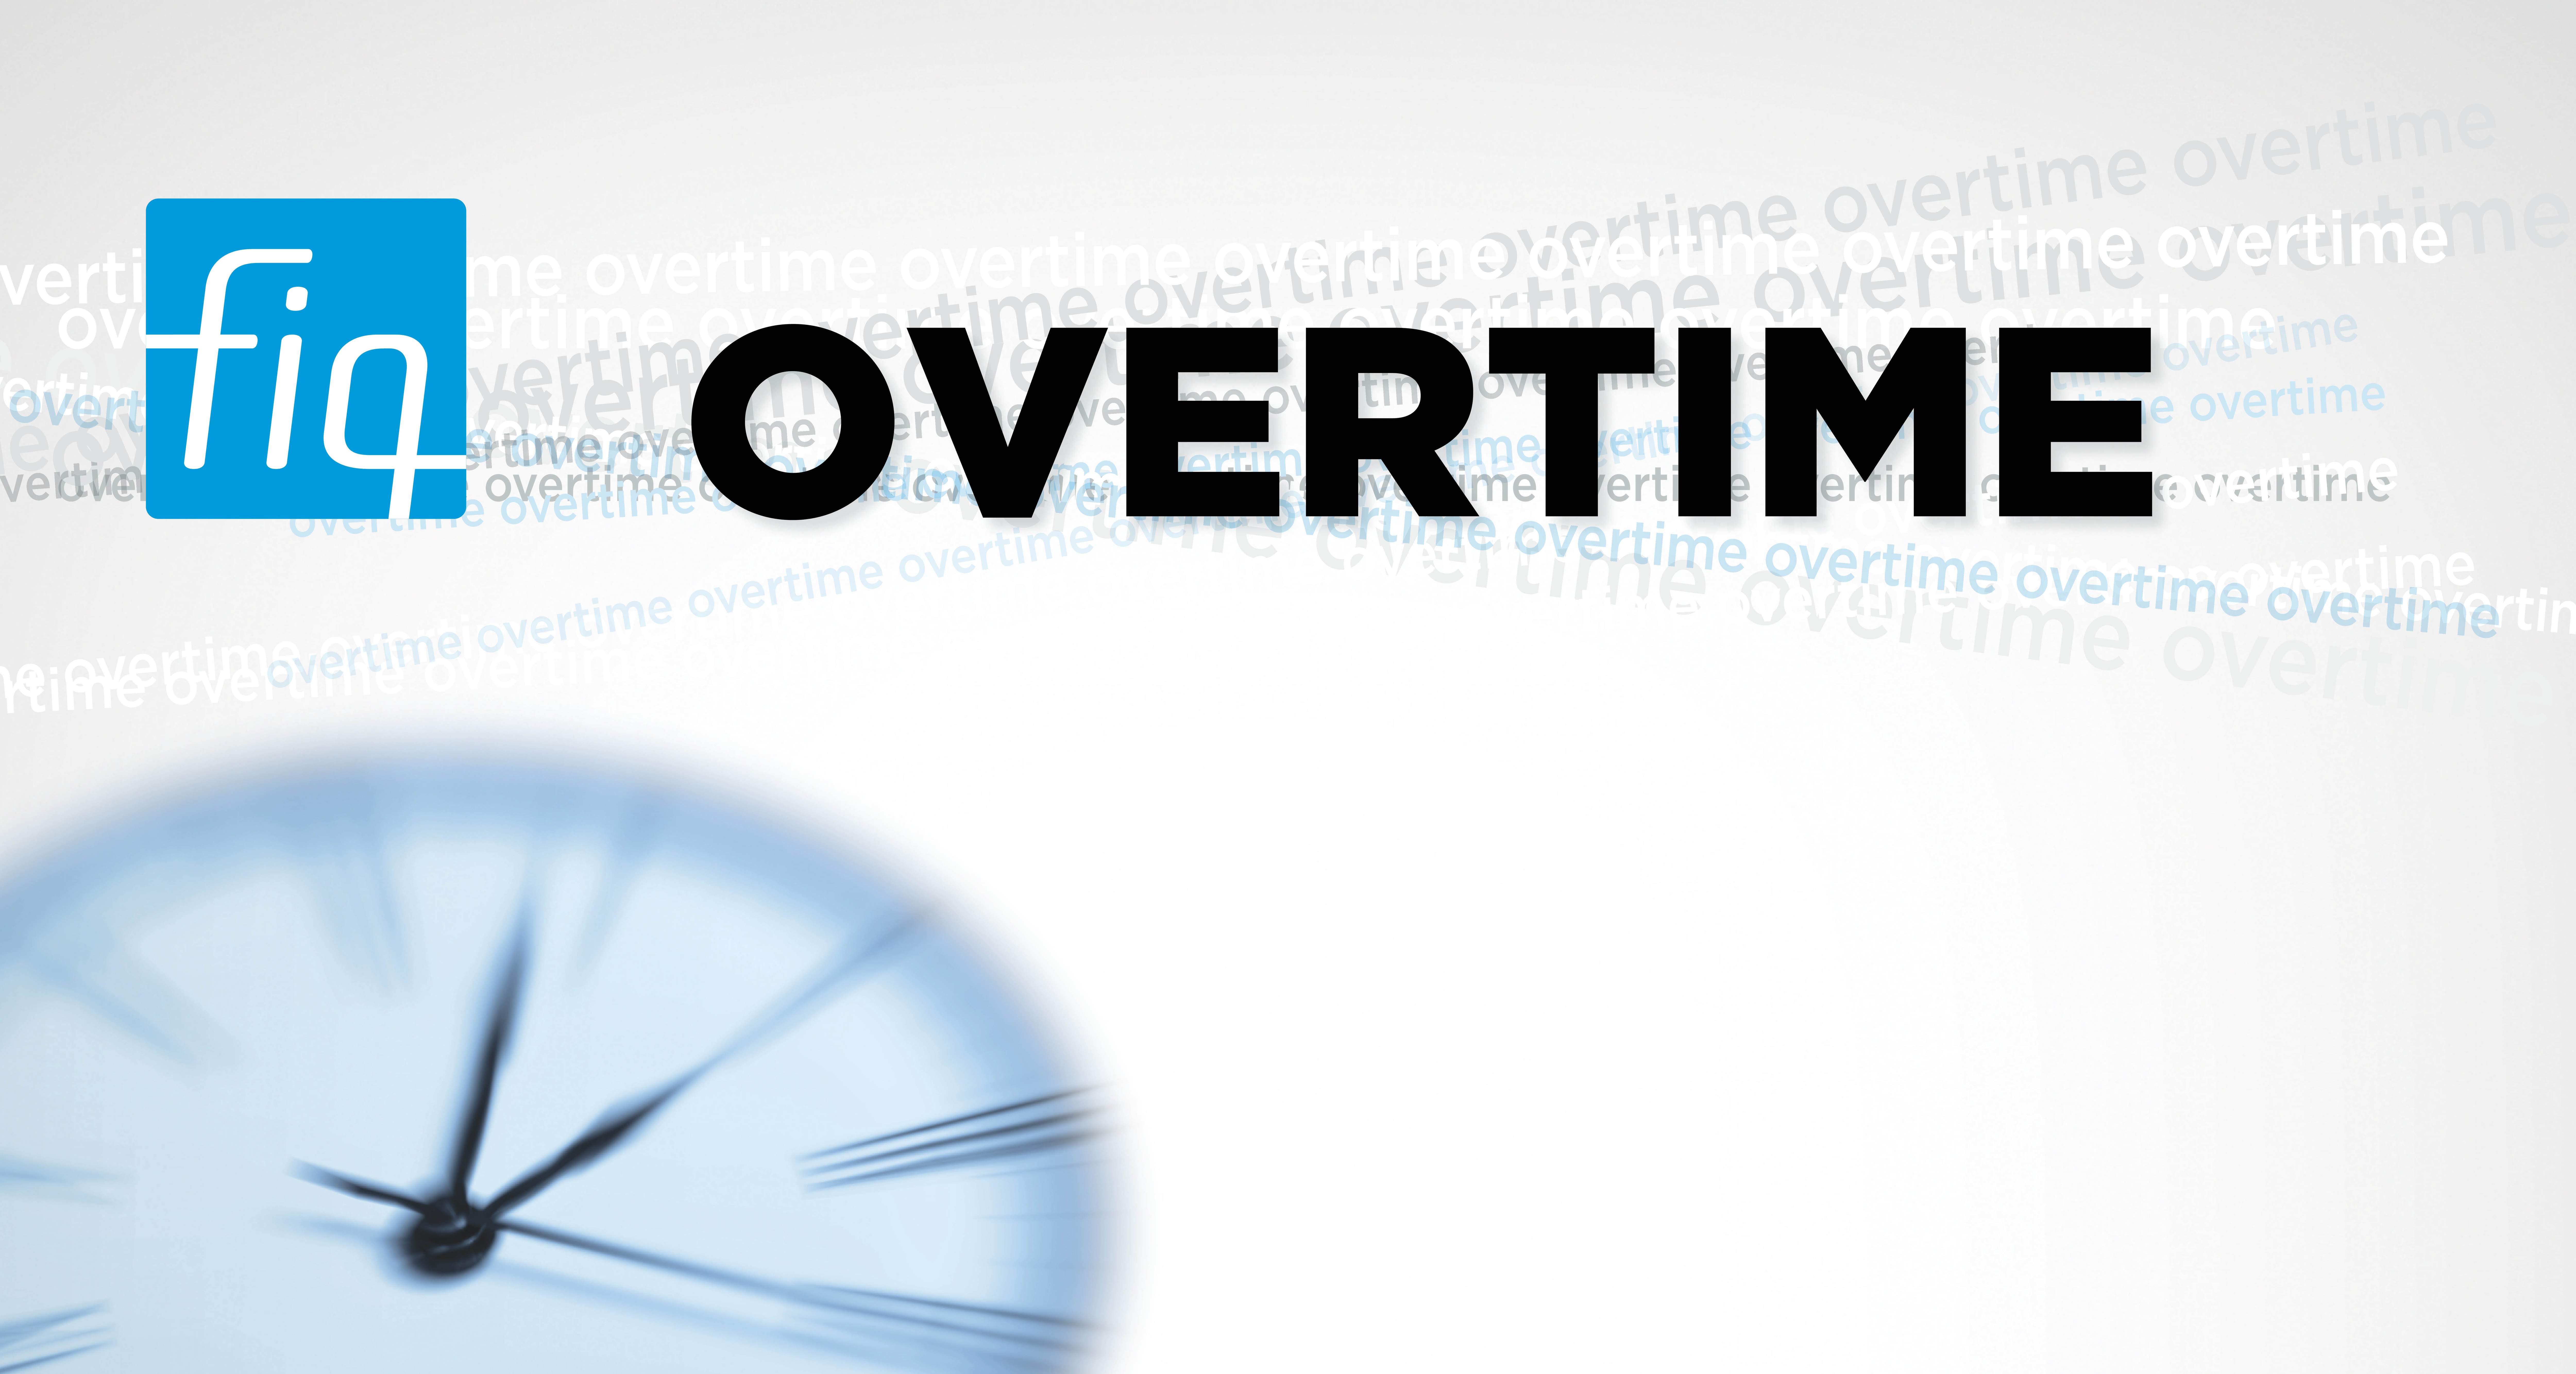 Compulsory Overtime: a major victory for the healthcare professionals at the CHU de Québec